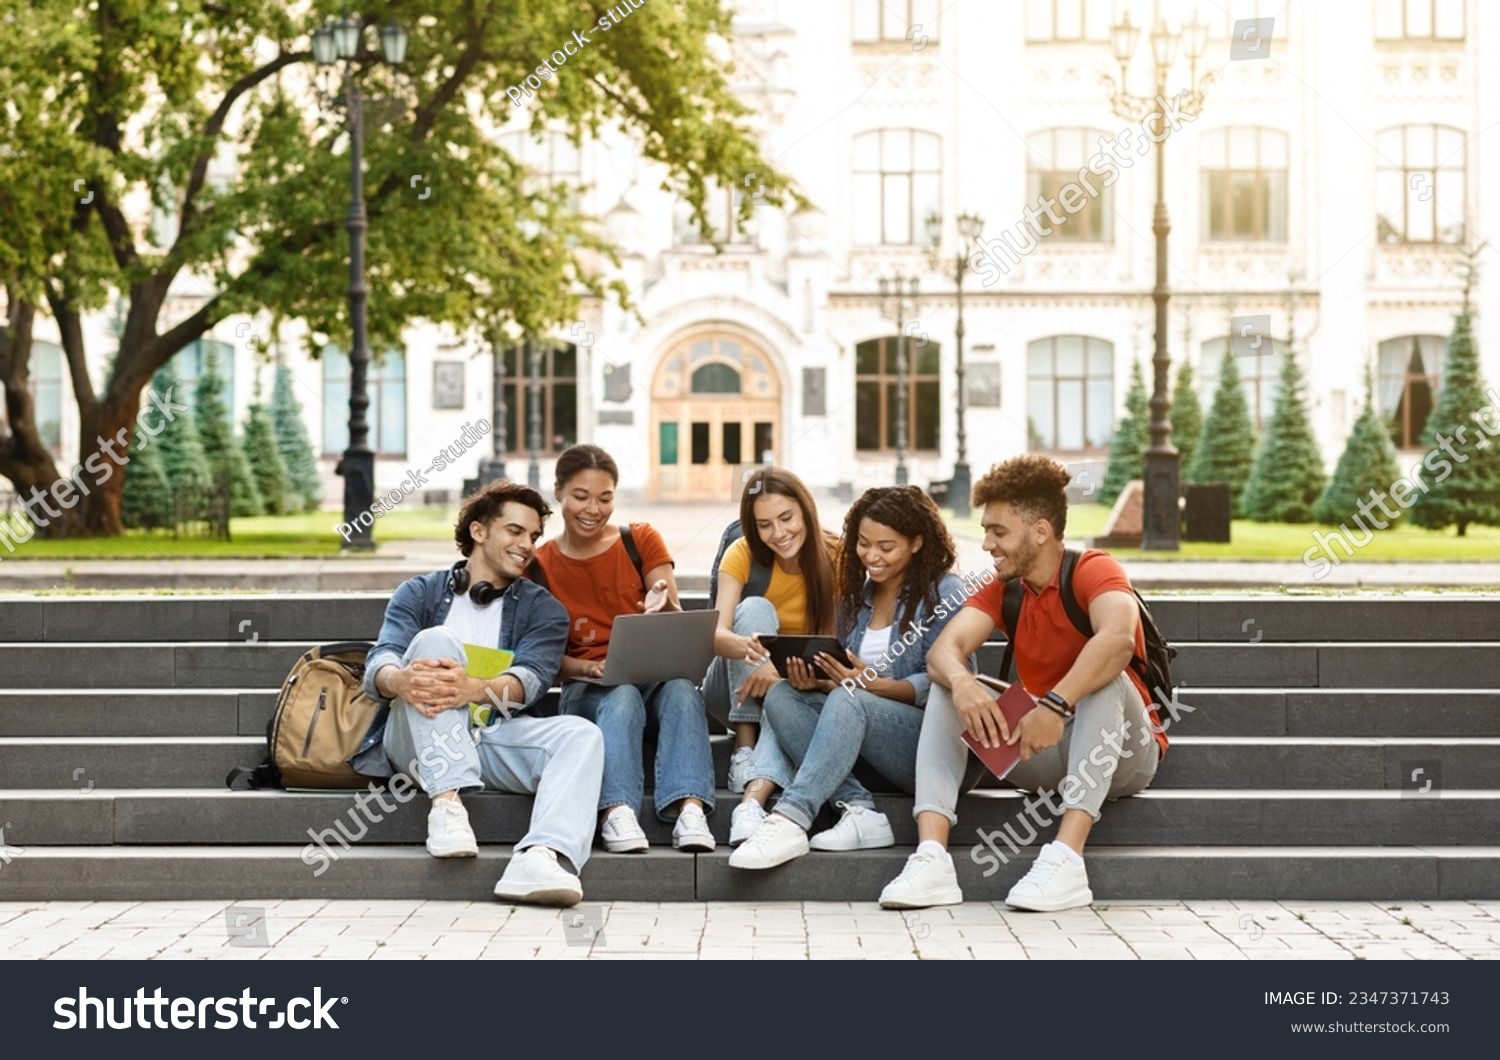 Group Of Students With Digital Tablet And Laptop Study Together Outdoors, Happy Multiethnic Young Friends Sitting On Stairs Near University Building, Using Modern Gadgets For Education, Copy Space #2347371743